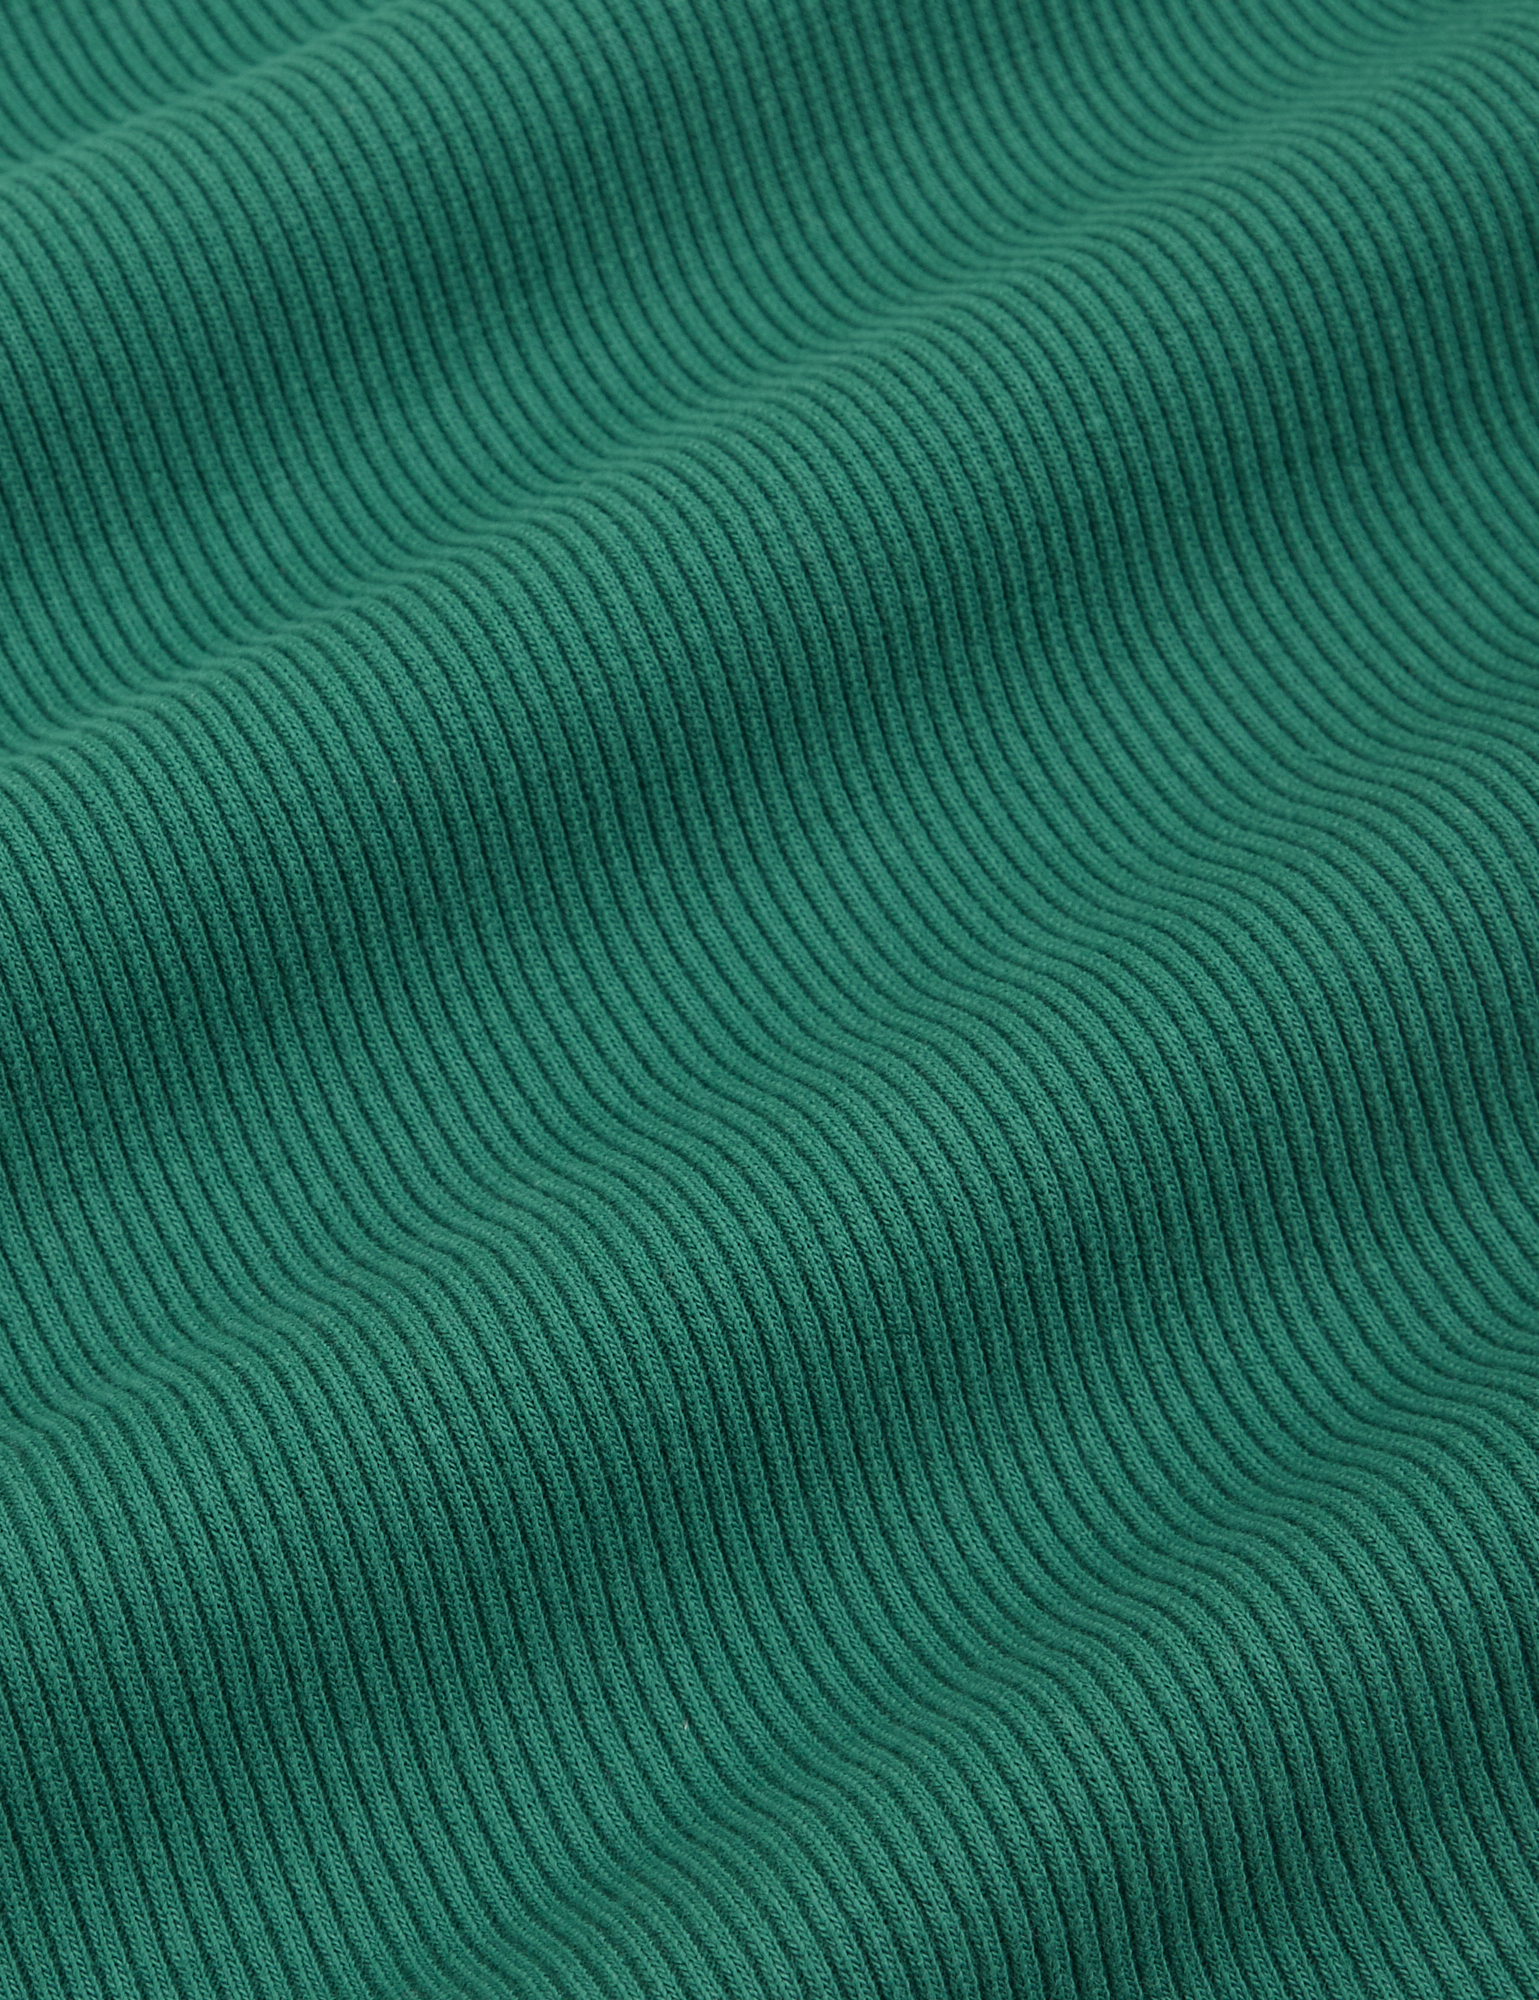 Sleeveless Essential Turtleneck in Hunter Green fabric detail close up